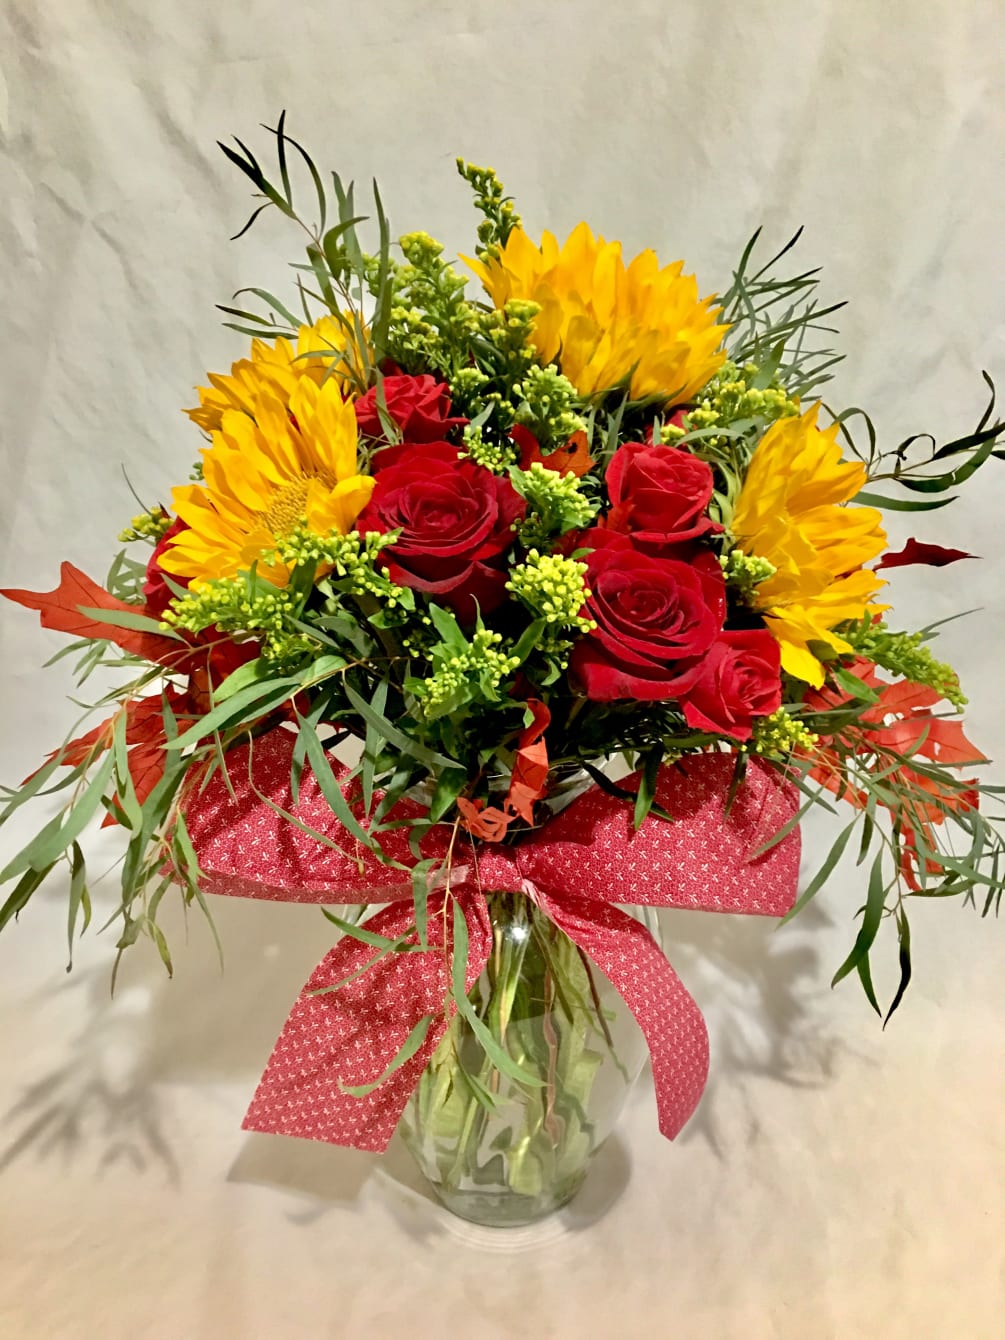 Roses with matching spray roses, Sunflowers with matching Solidago, Preserved Oak Leaves